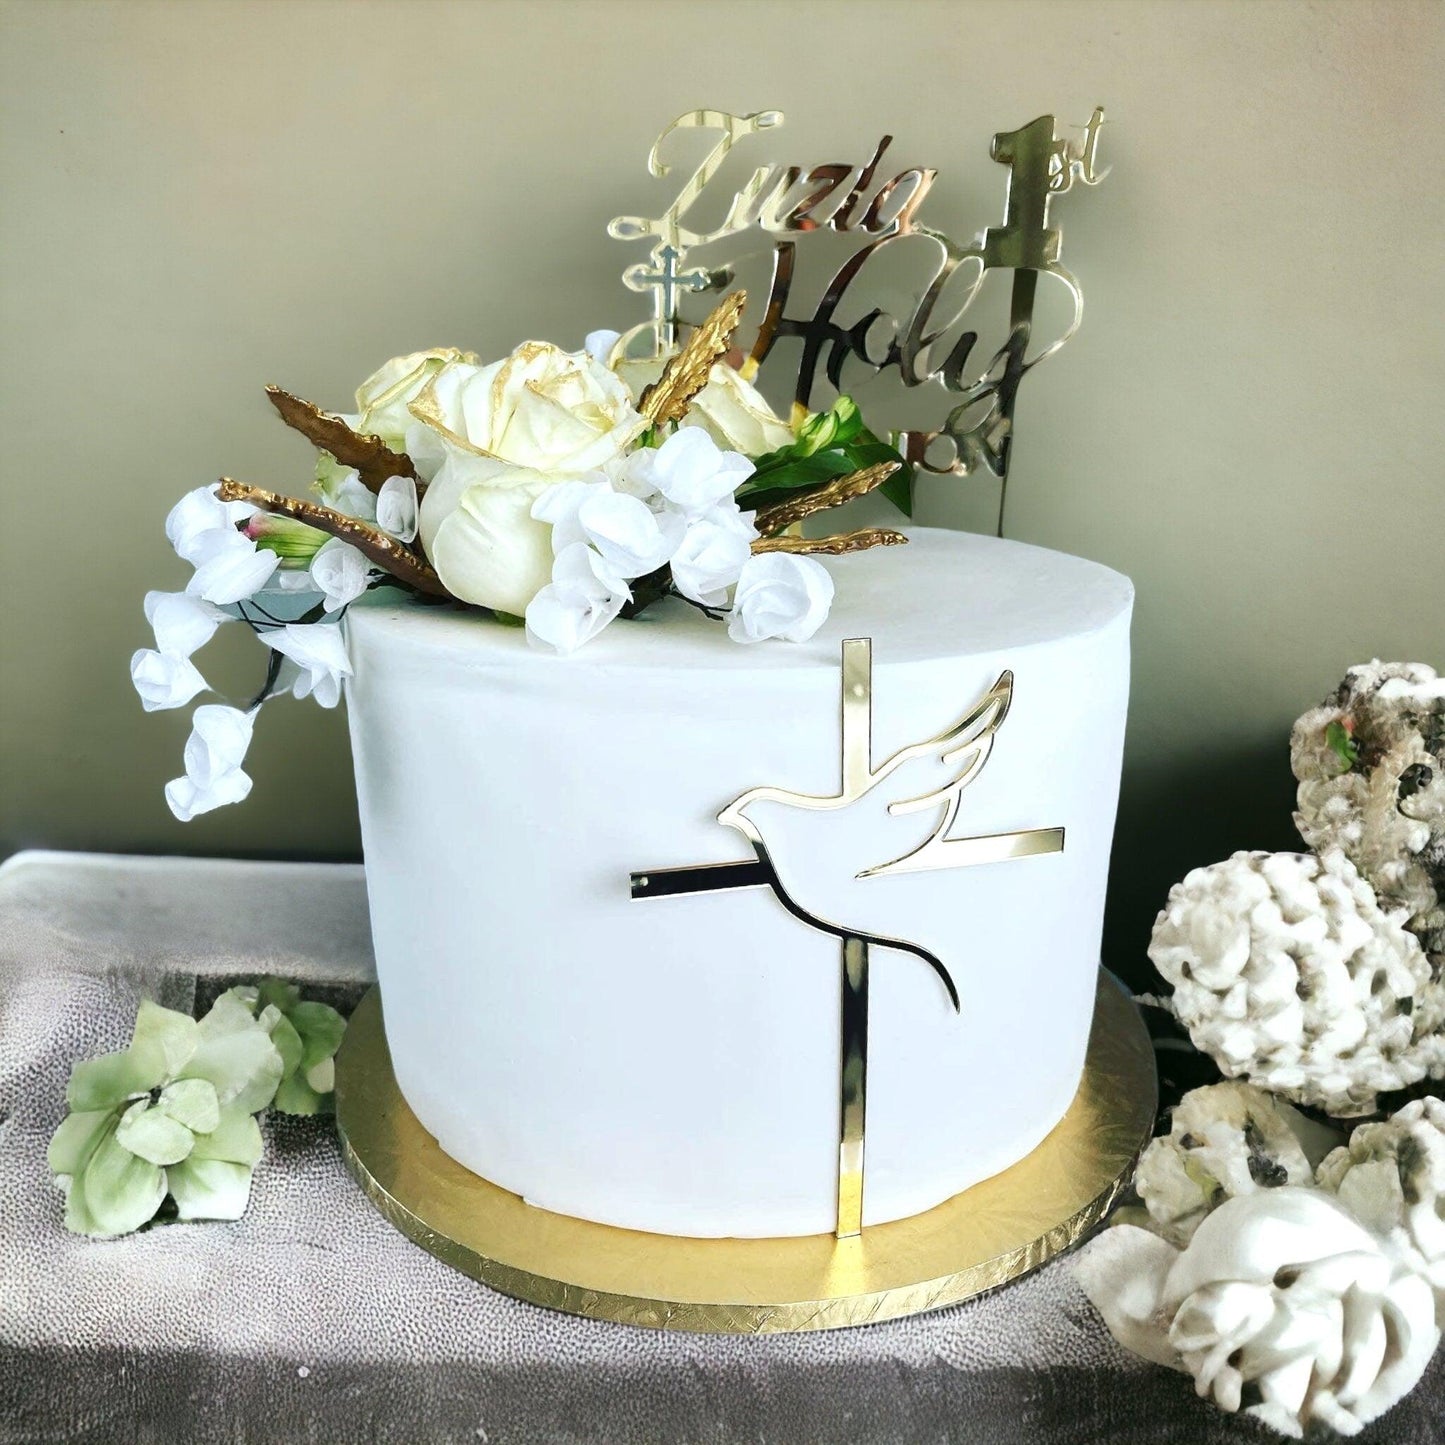 Holly Communion cake - Naturally_deliciousss